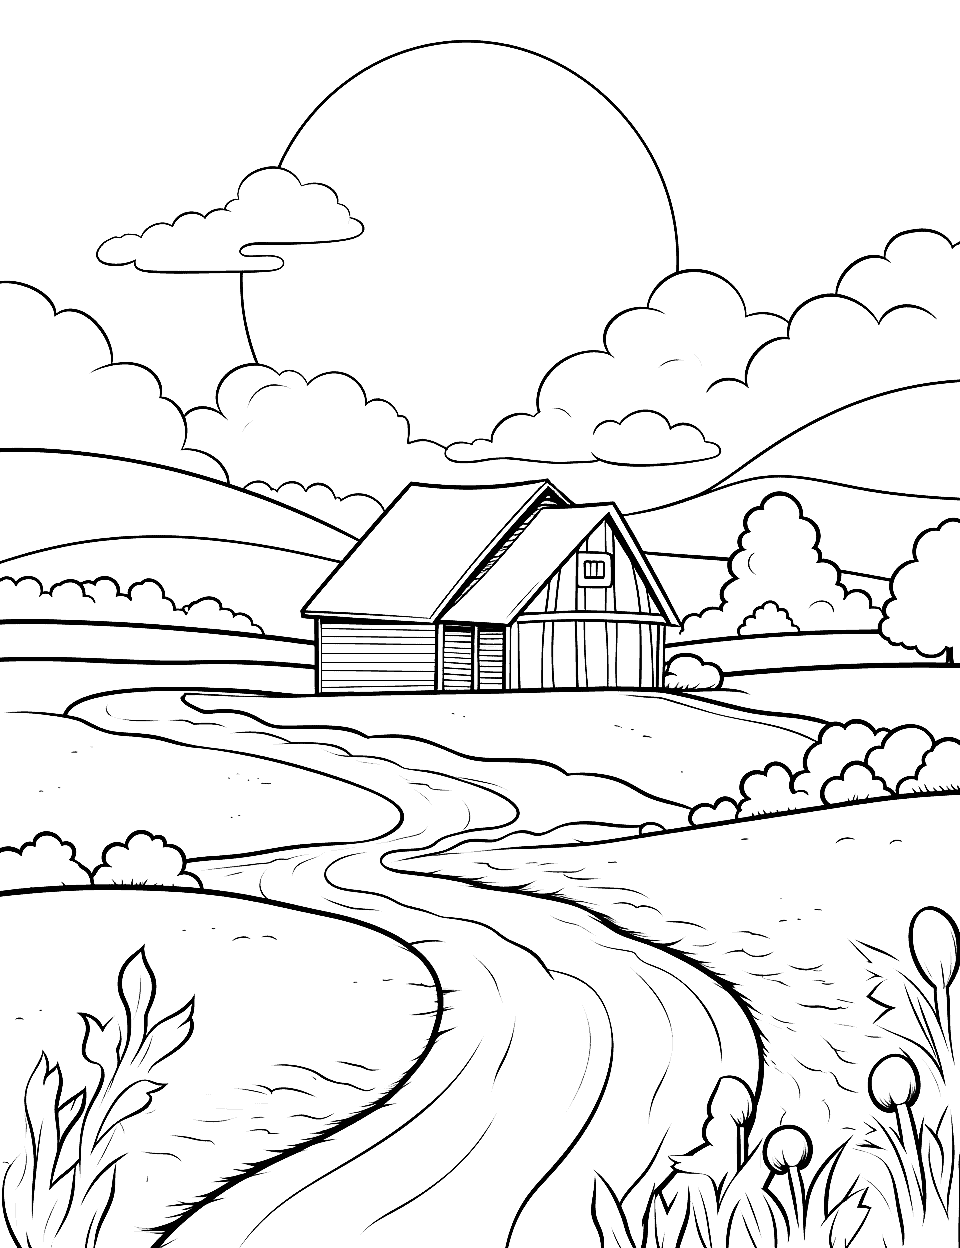 Farm Landscape with Barn Coloring Page - A simple farm scene with a barn and a clear sky in the distance from the twisting road.